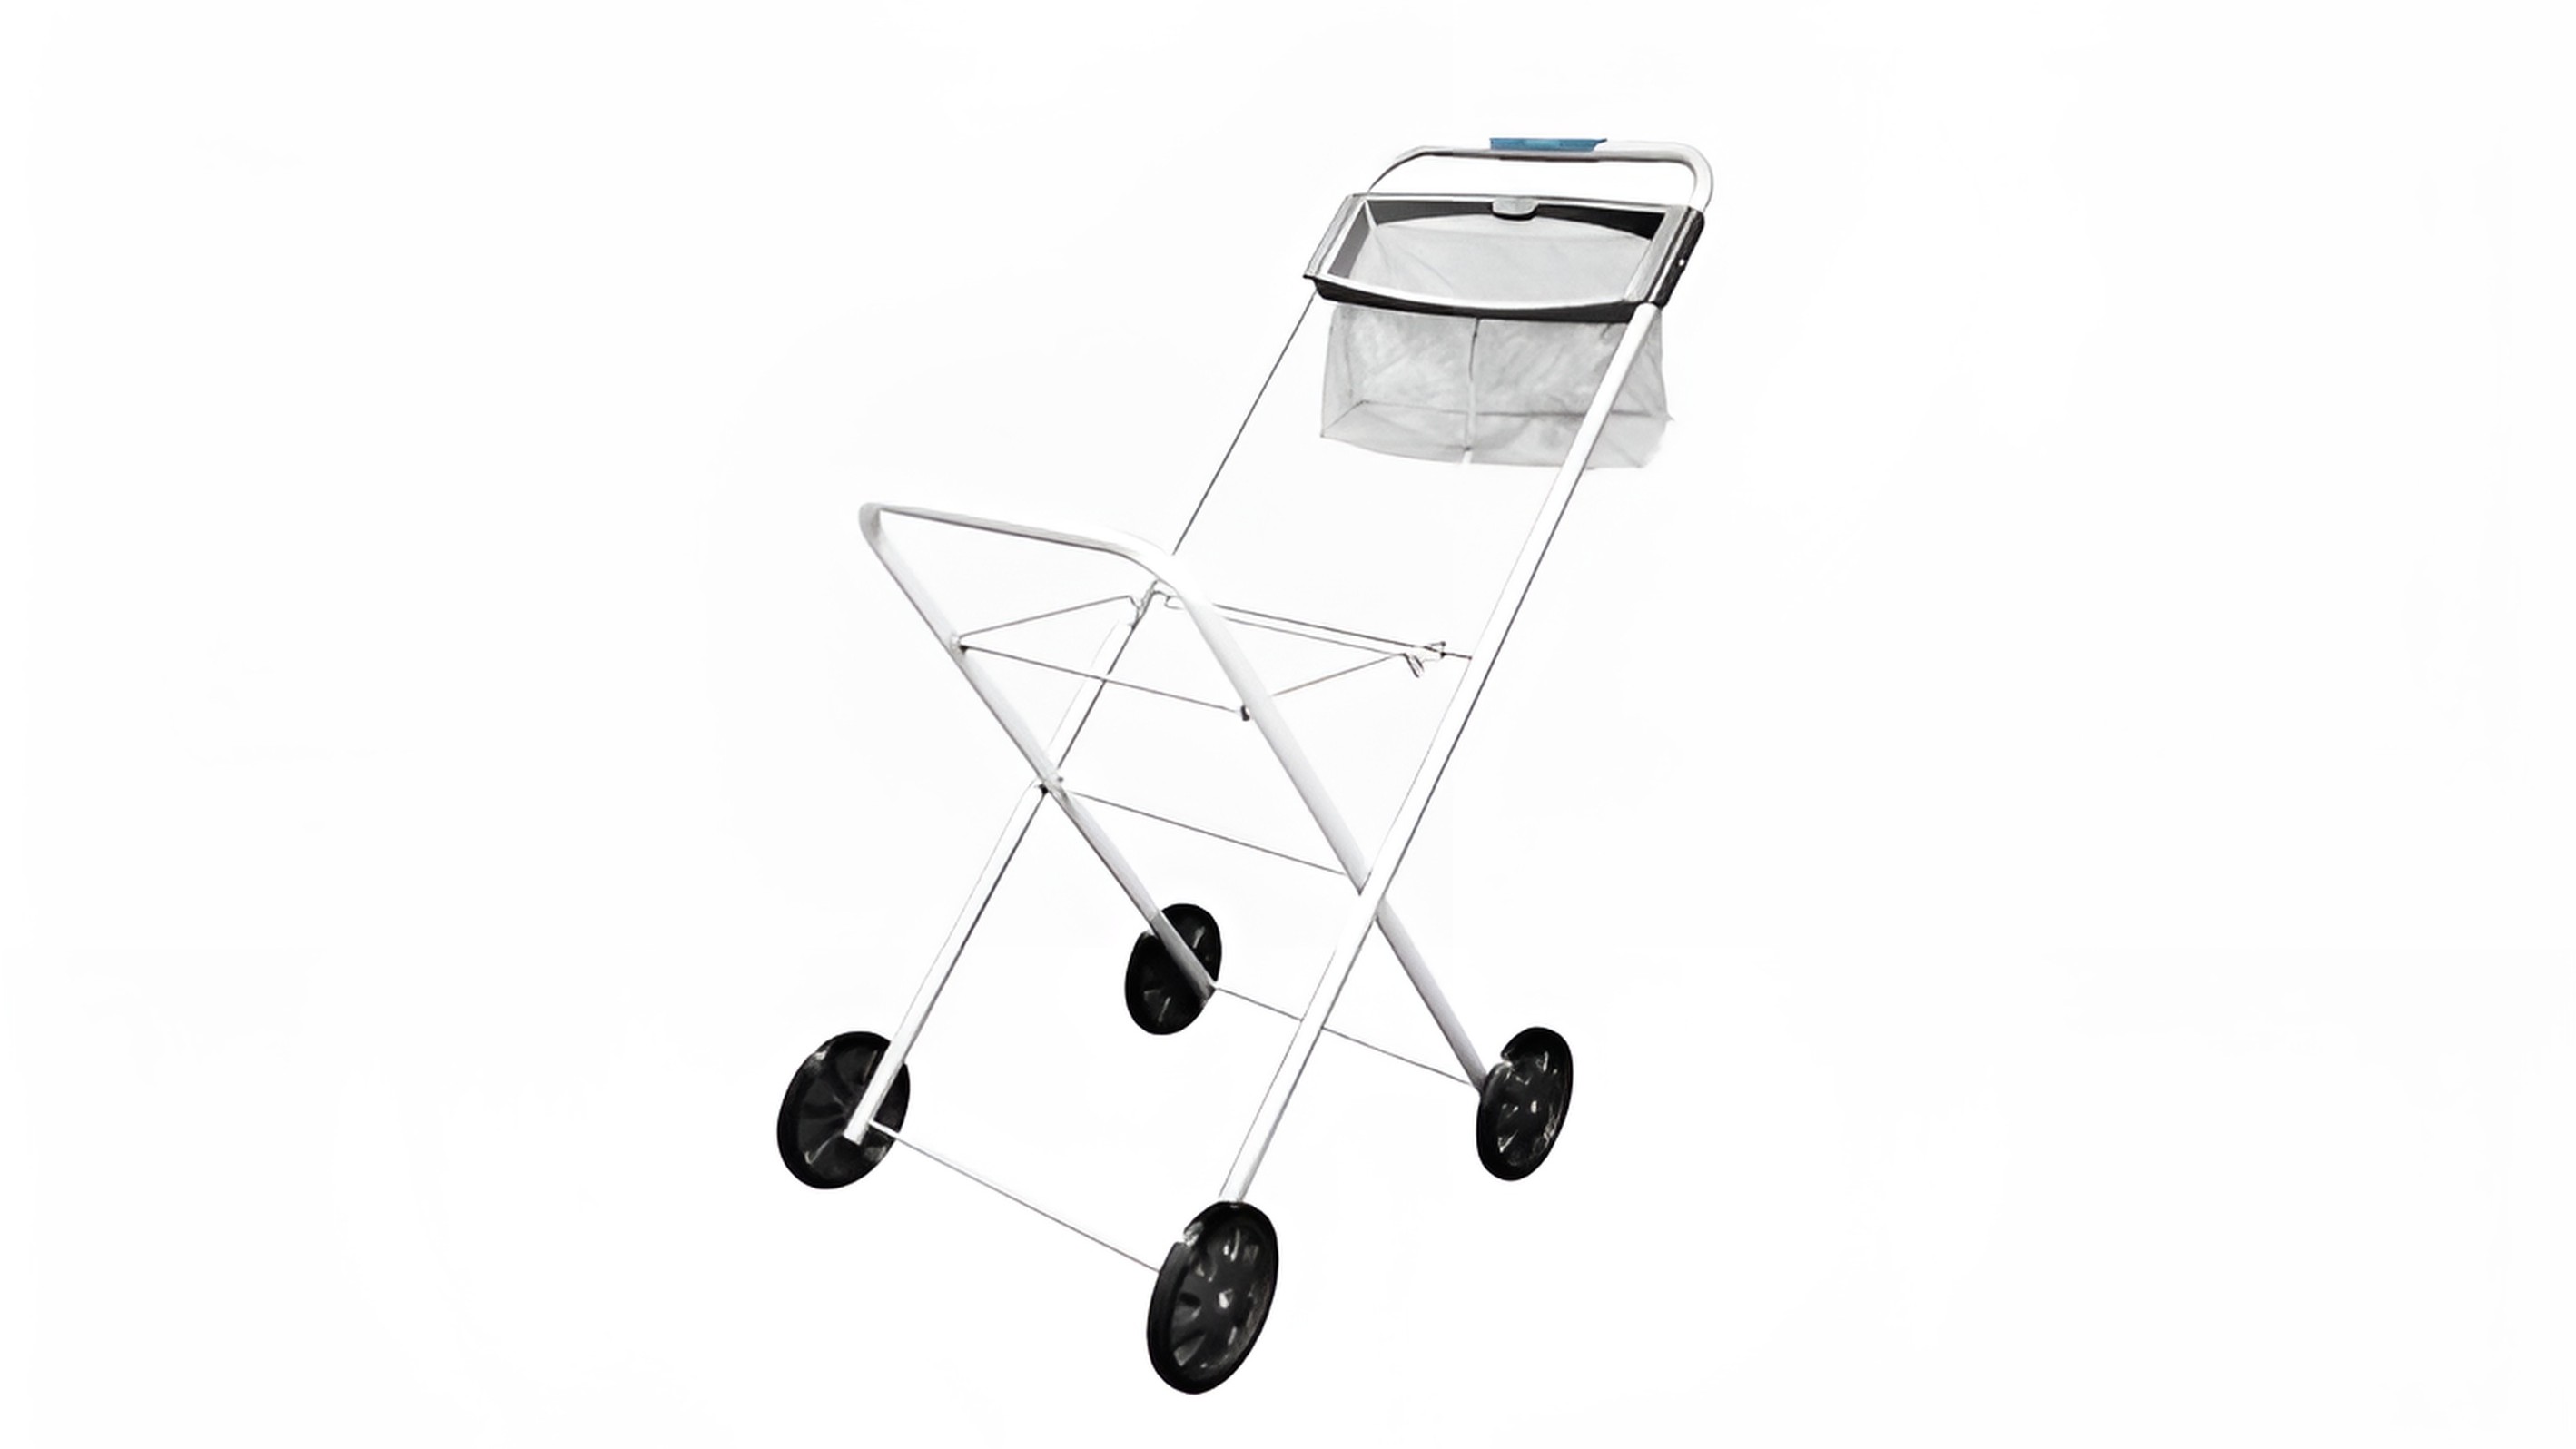 Laundry Basket Trolley The All-in-One Solution: Laundry Basket Trolley